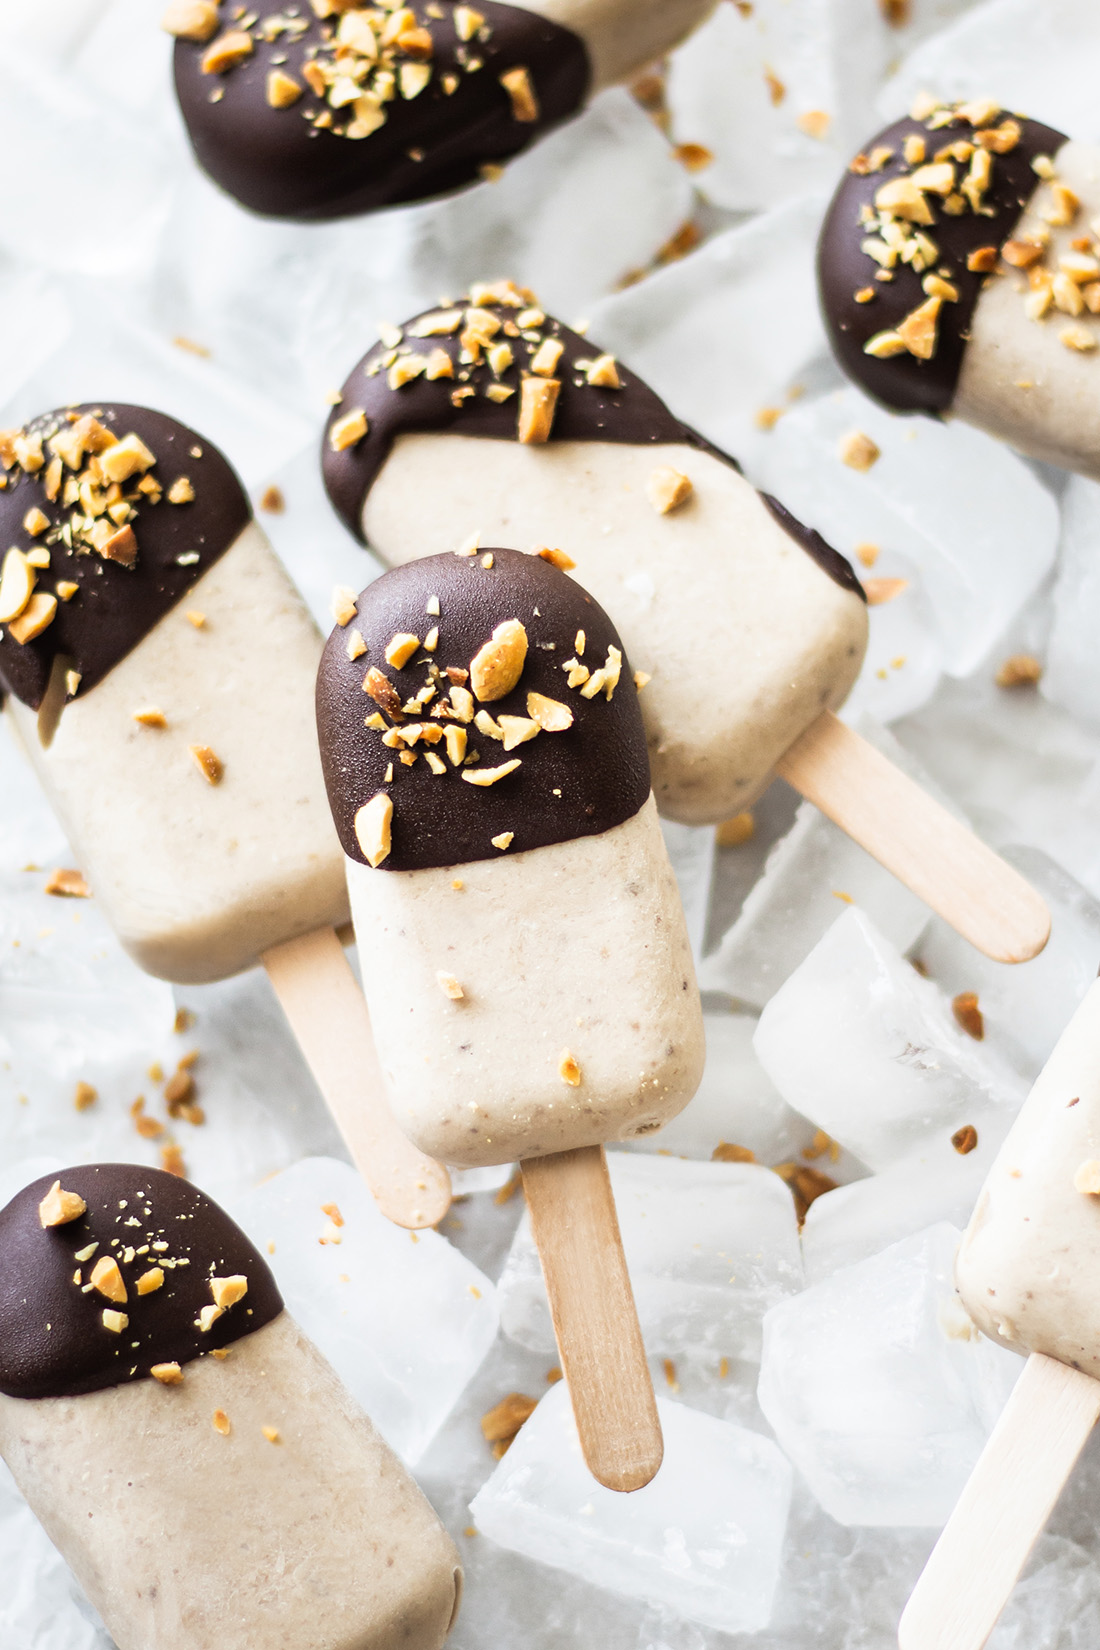 Peanut butter banana popsicles decorated with chocolate glaze and chopped peanuts